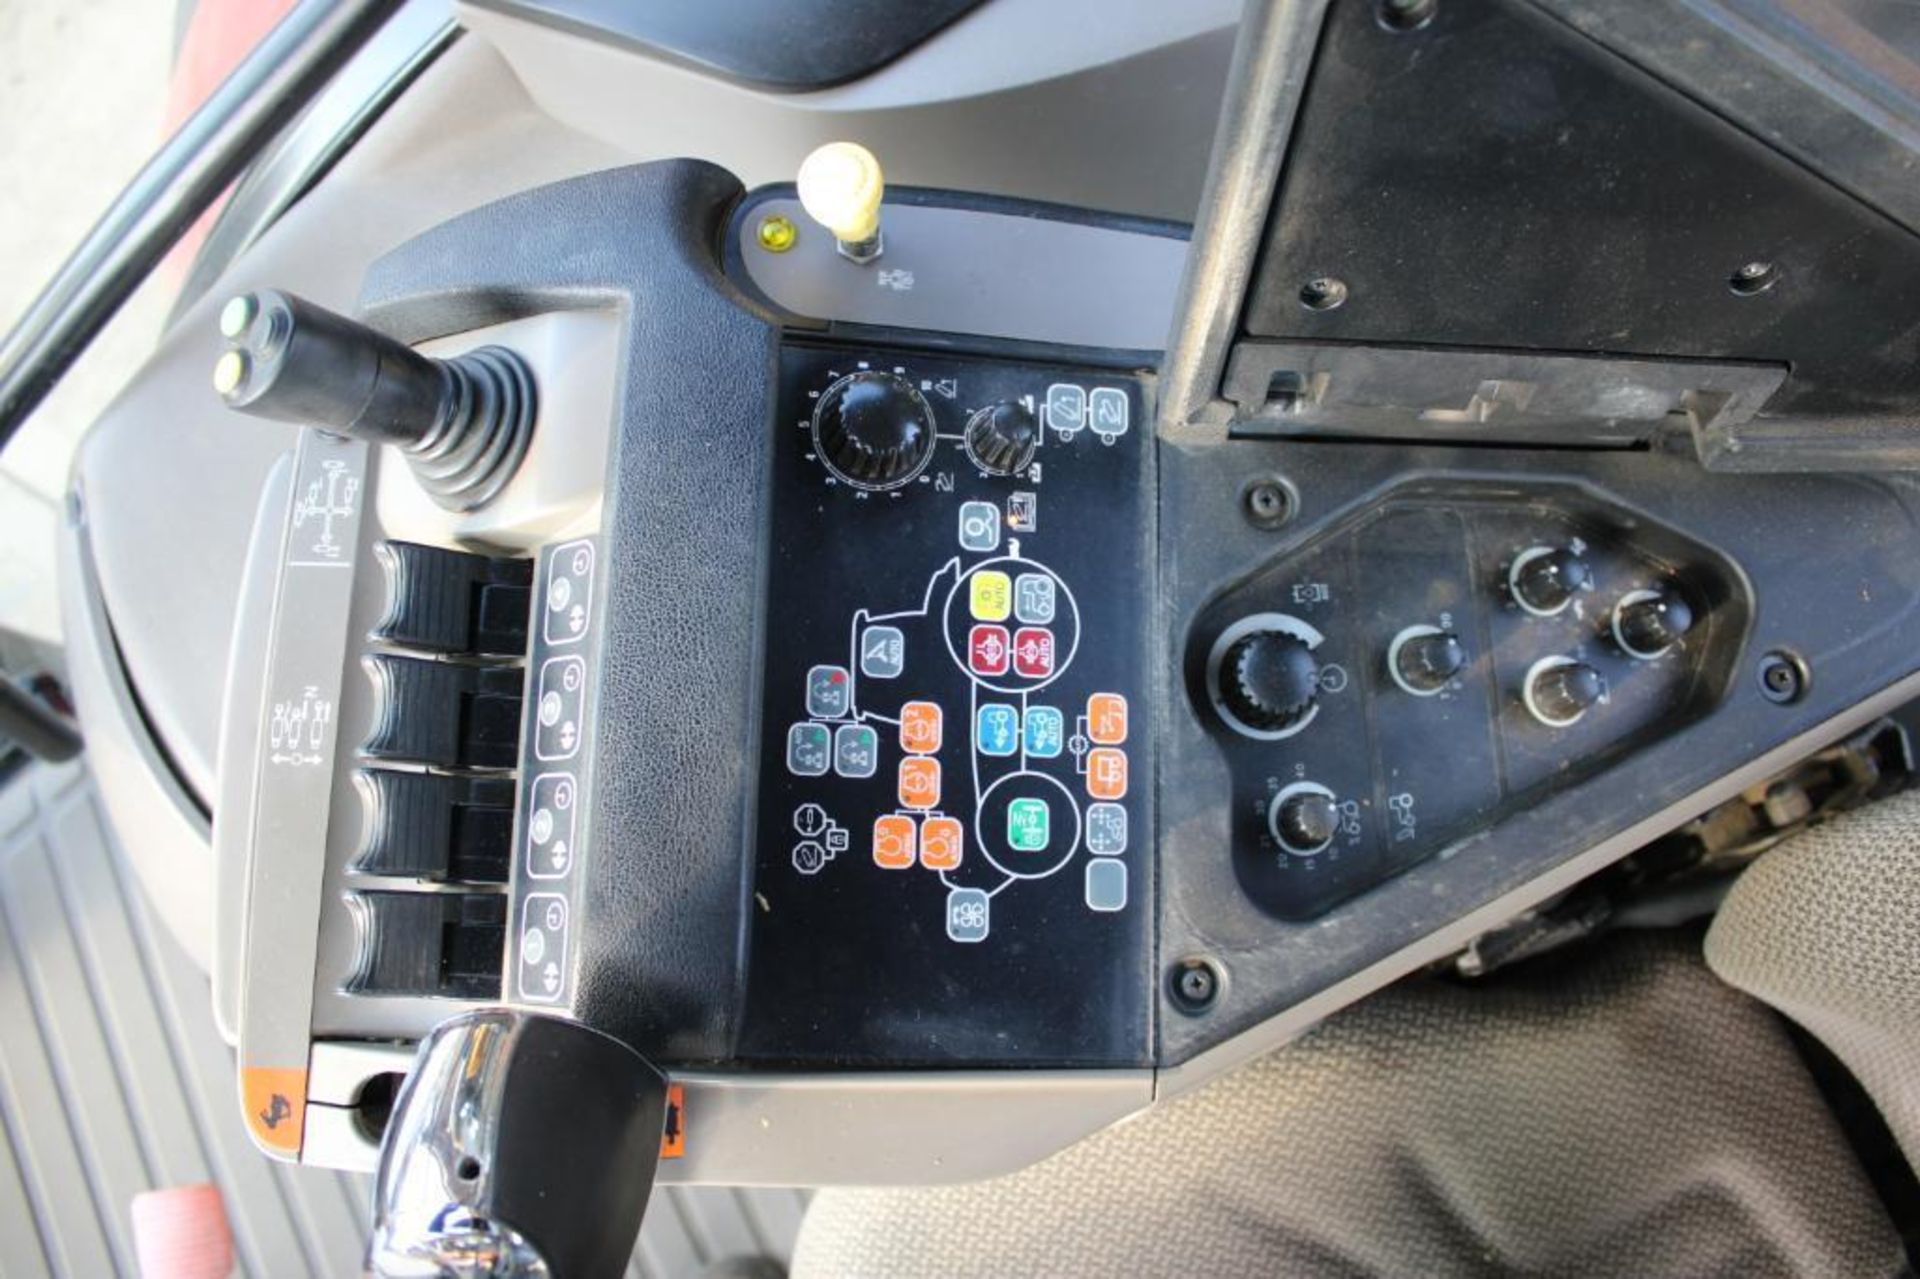 2013 Case Maxxum 140 50kph 4wd Powershift tractor with multicontroller joystick, front linkage, cab - Image 36 of 40